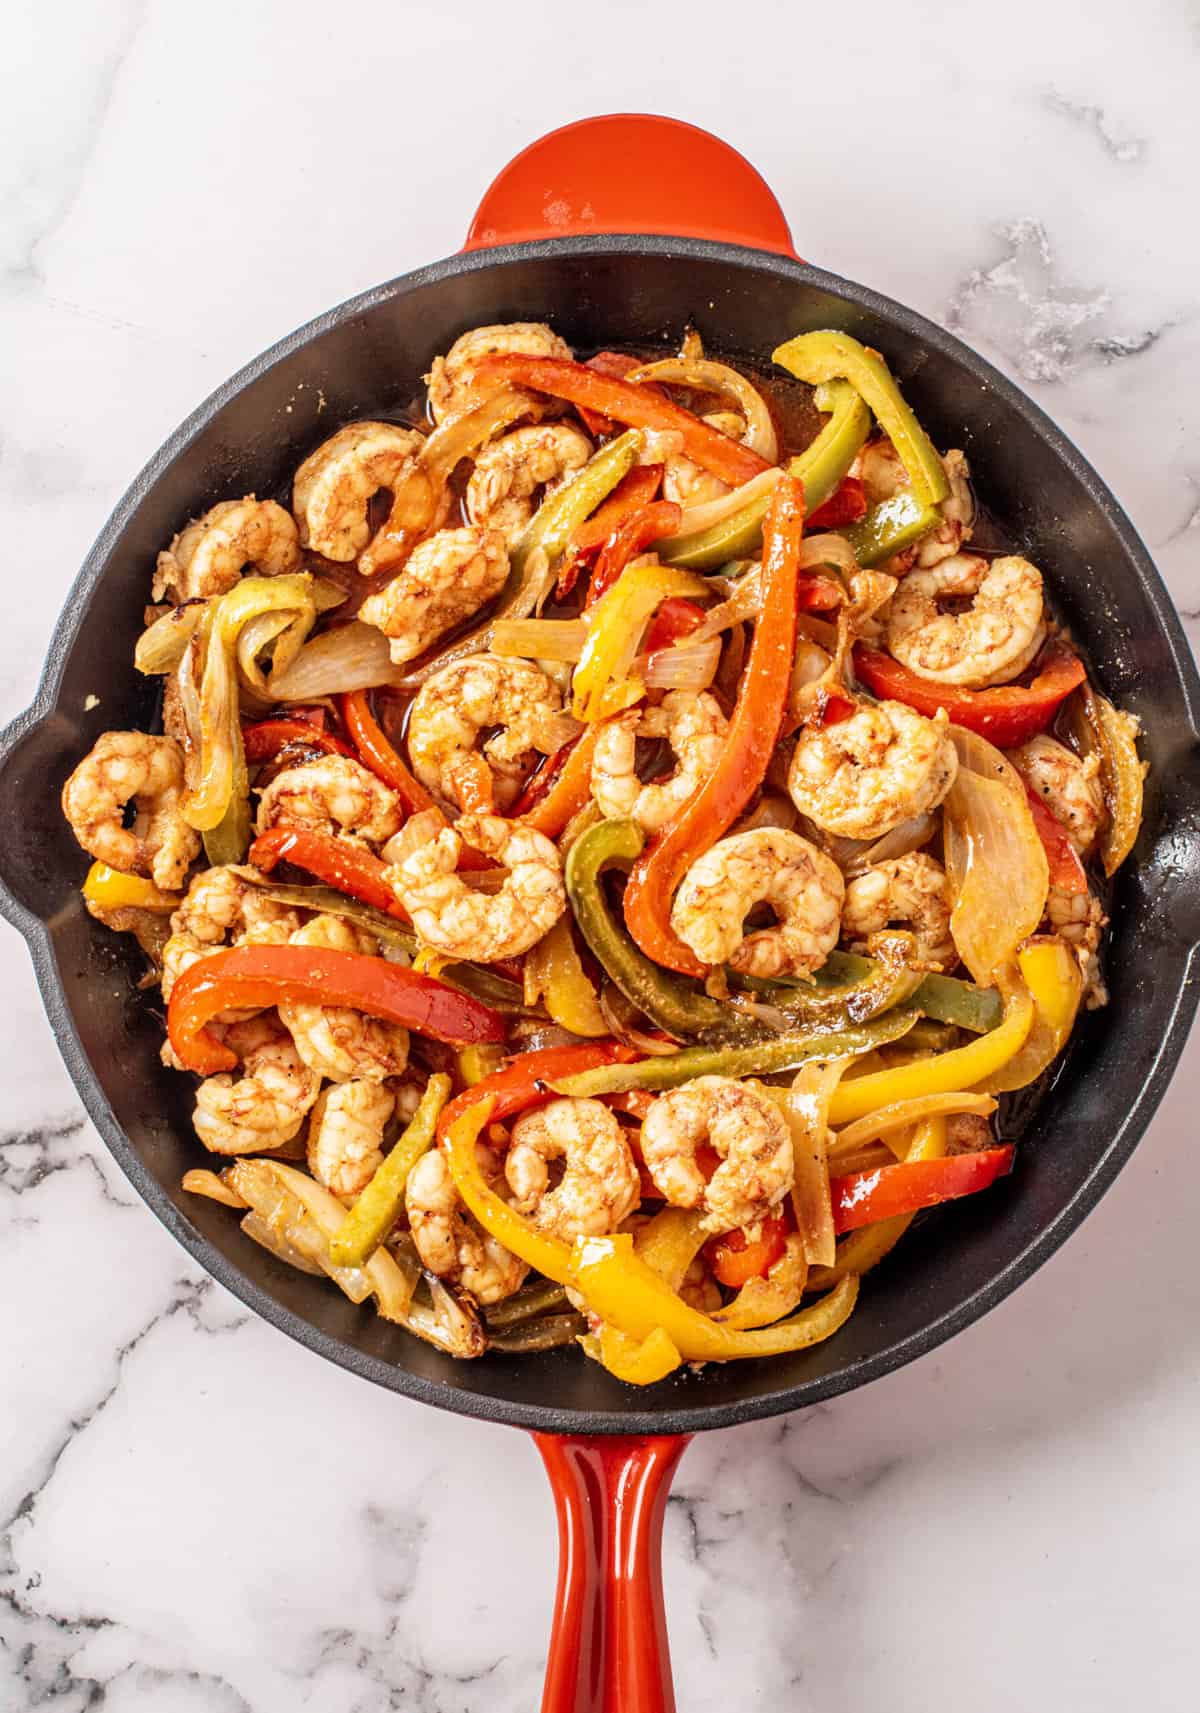 Shrimp and bell peppers are cooked in a large black and red skillet.